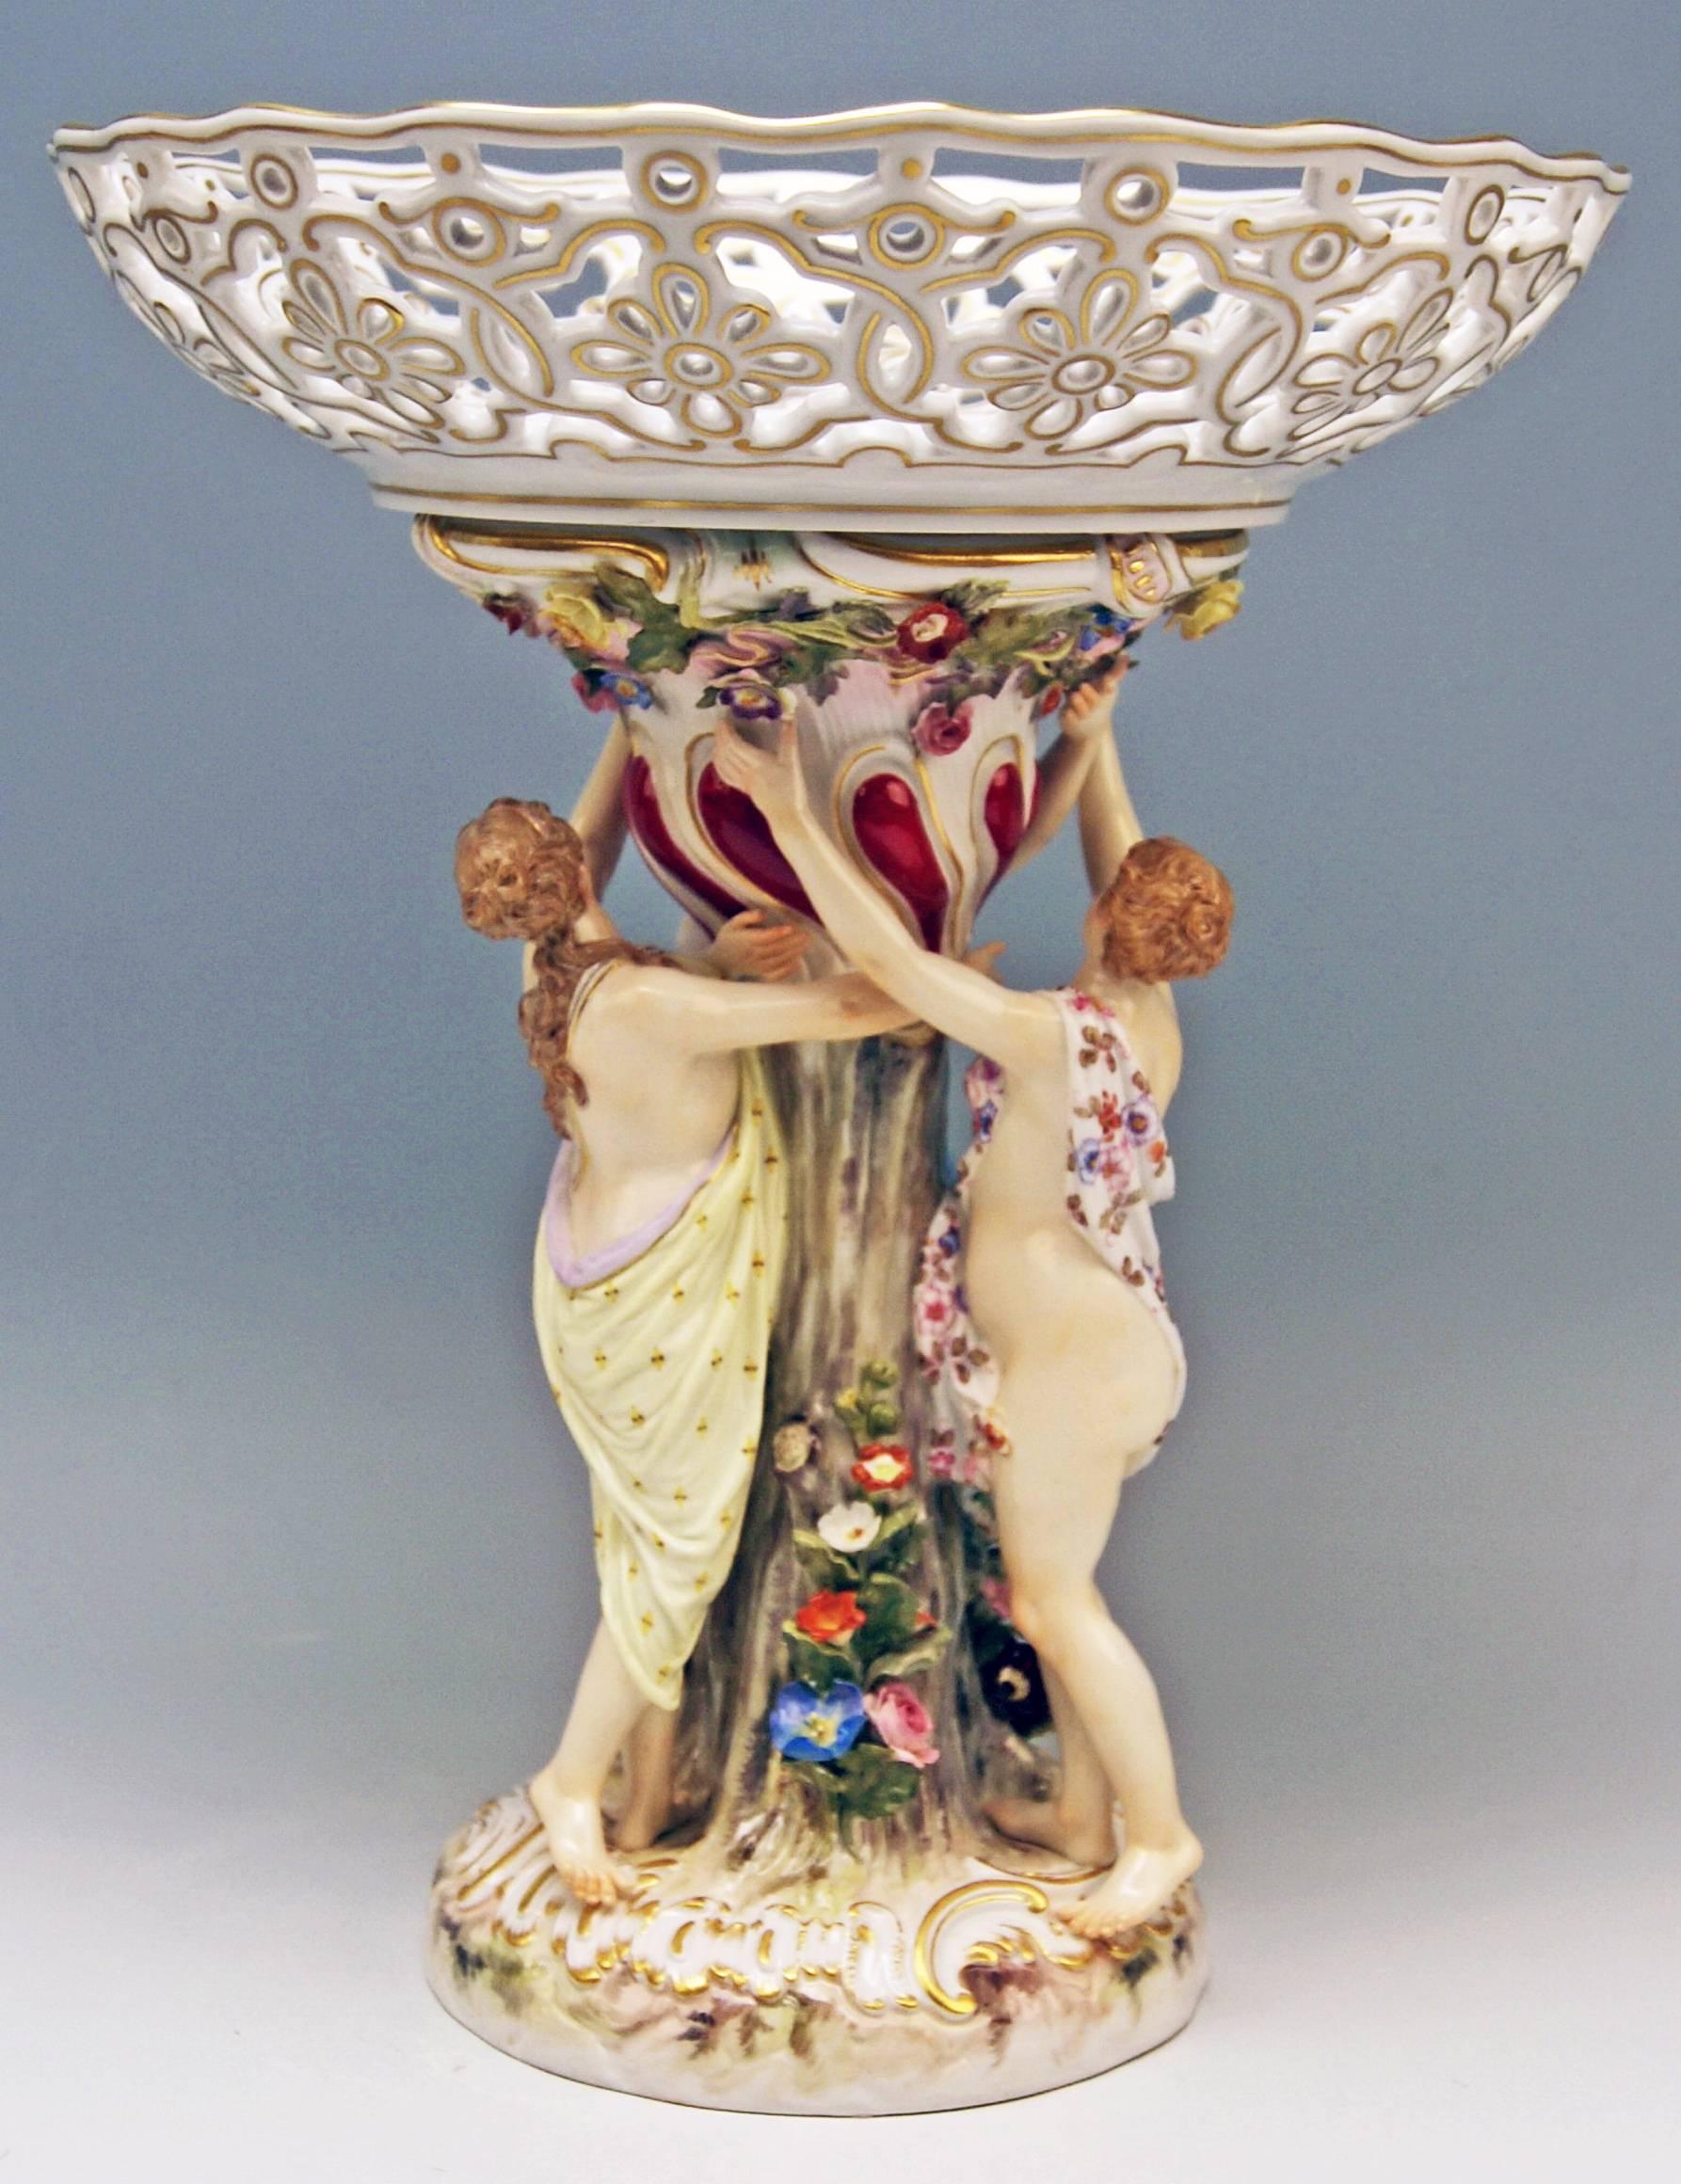 Meissen centrepiece / fruit bowl, supported by three sculptured female figurines, depicting the Three Charities. 

Measures:
height 12.00 inches (30.5 cm)
diameter of bowl 9.64 inches (24.5 cm)

Manufactory: Meissen
Hallmarked: Blue Meissen